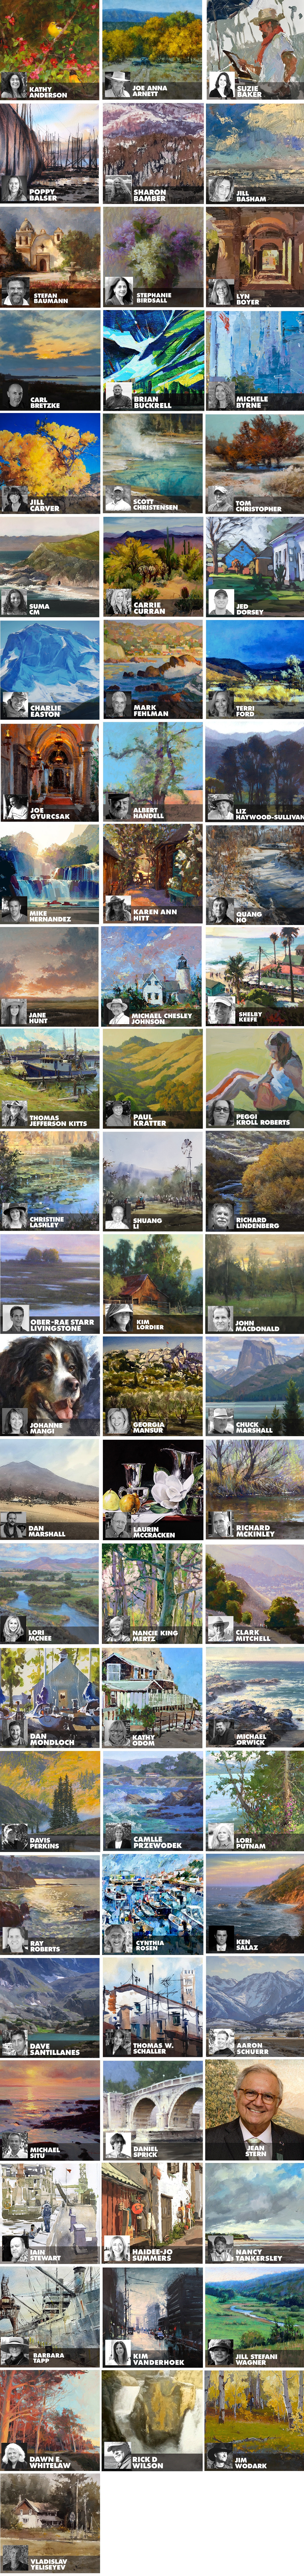 Plein Air Convention events for artists 